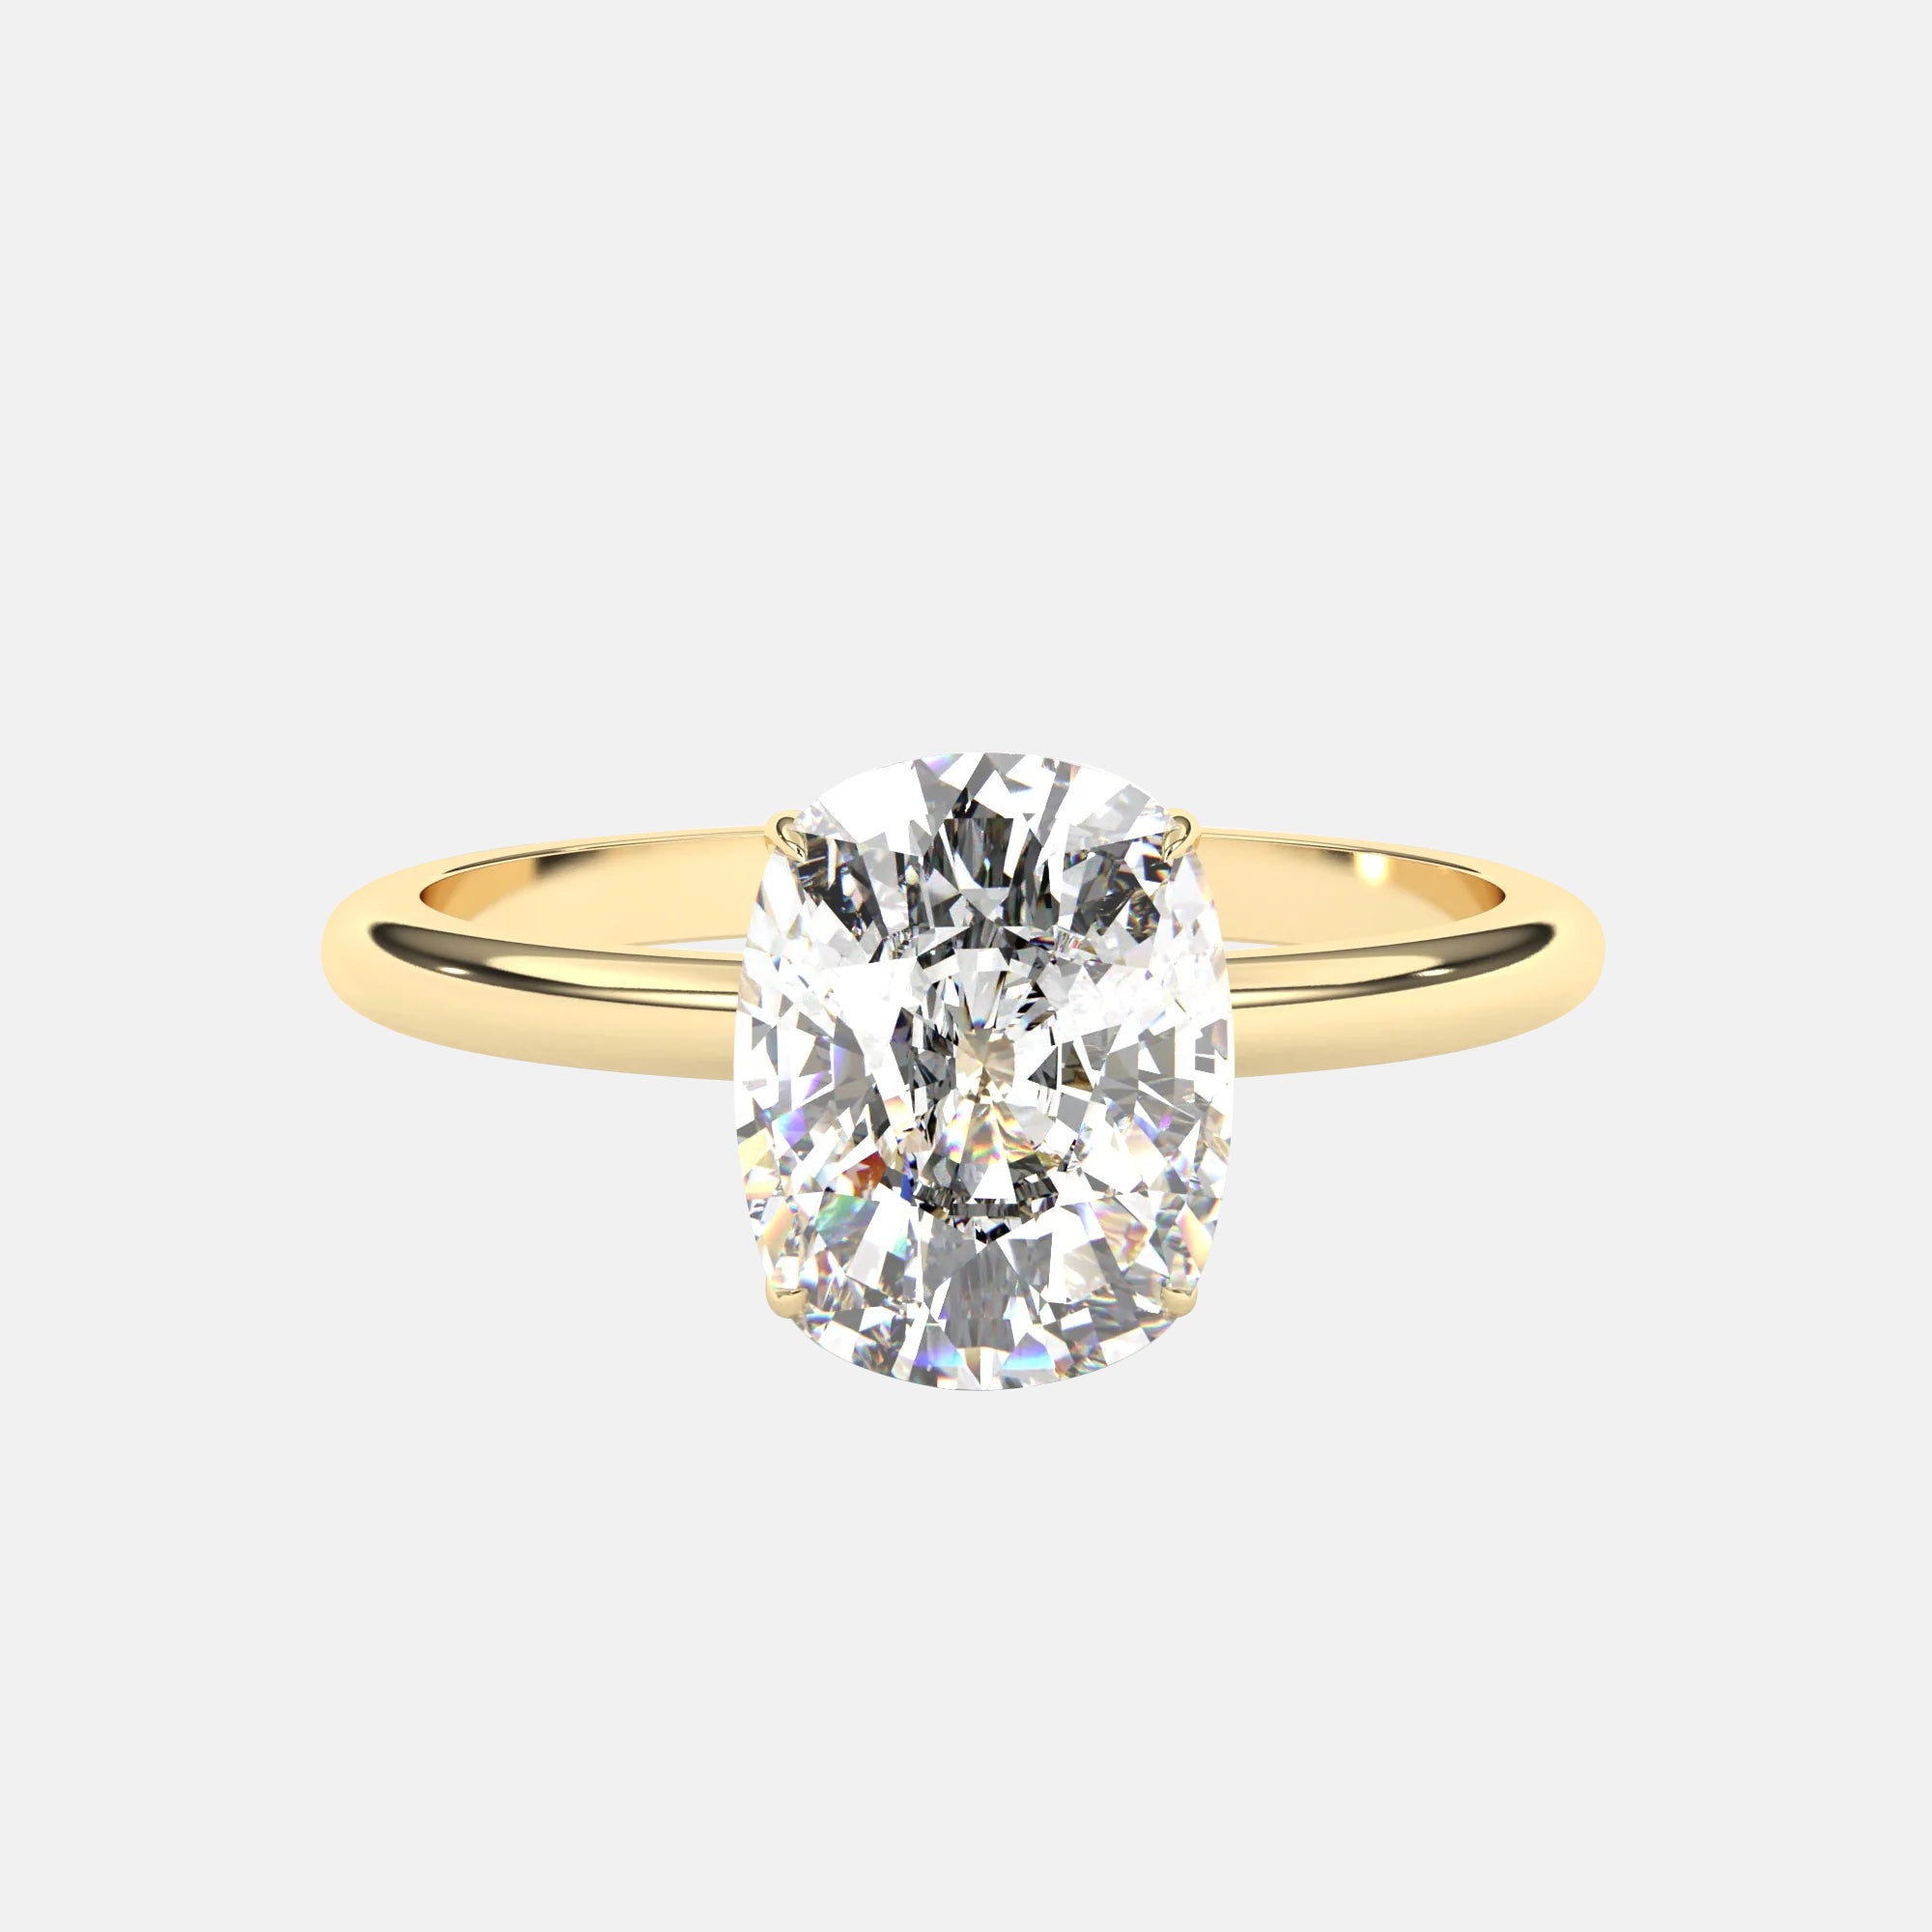 The Ophelia Ring - 8x6mm (1.75ct) Moissanite Elongated Cushion Solitaire